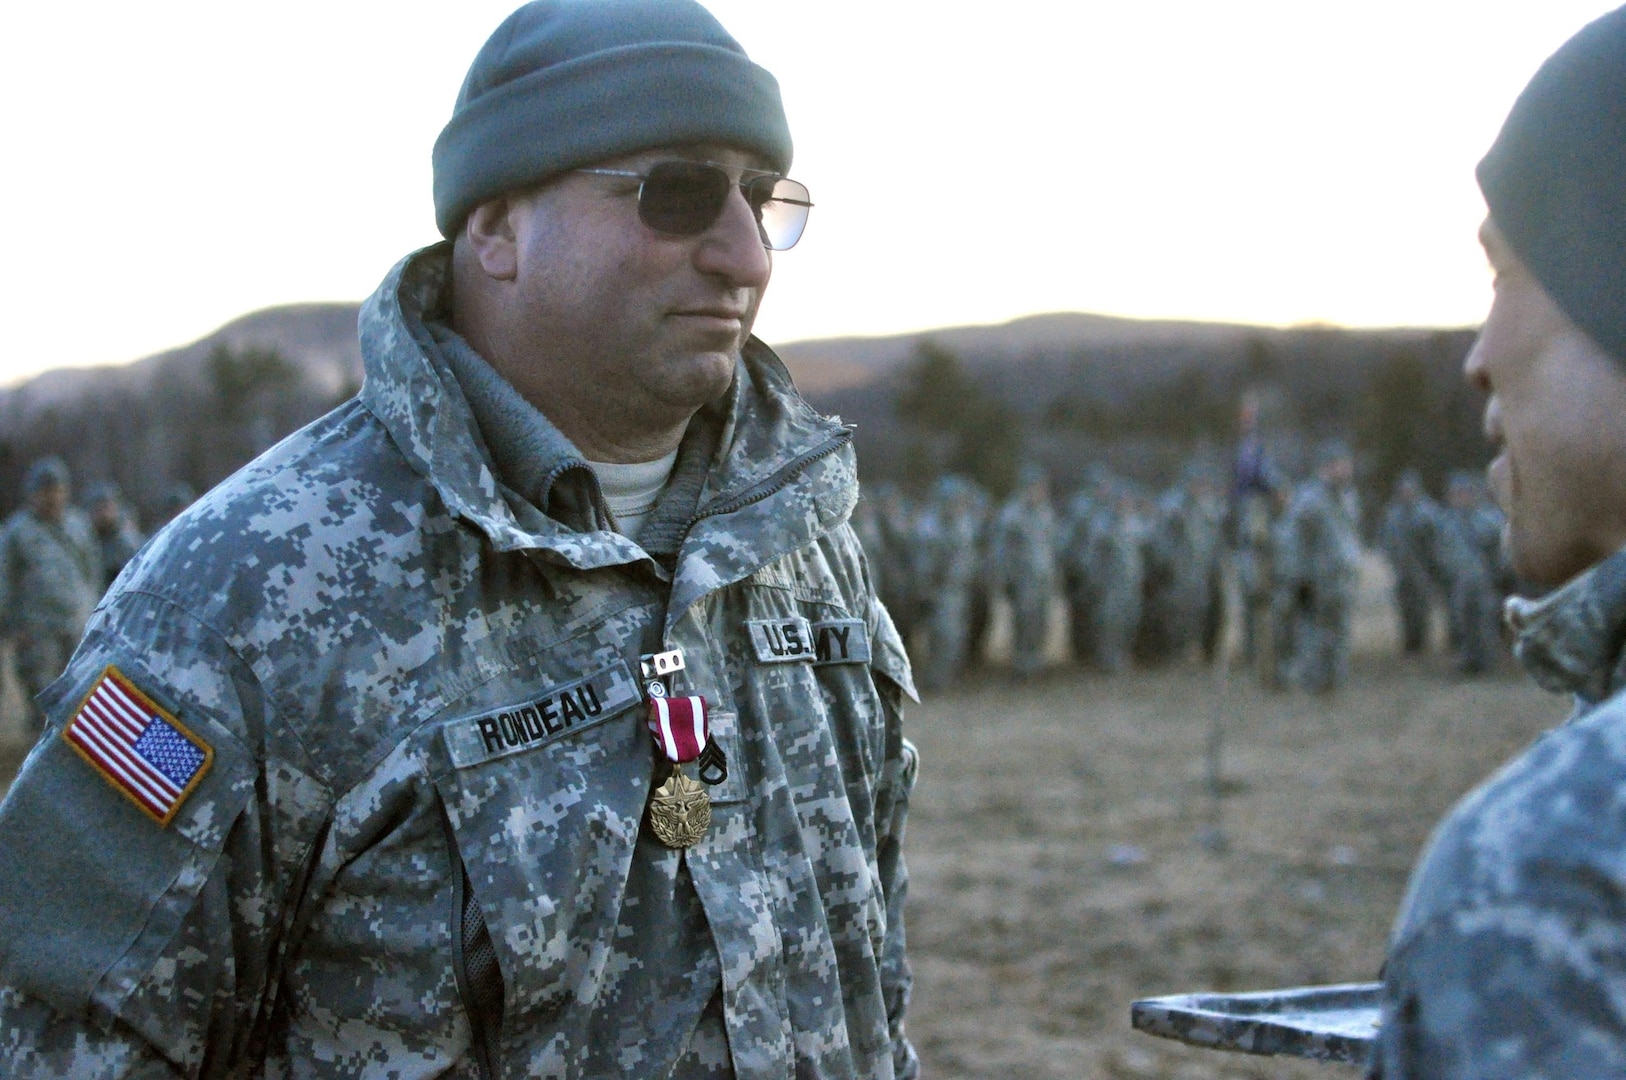 Staff Sgt. David T. Rondeau from Alpha Company, 3rd Battalion, 172nd Infantry Regiment (Mountain) received the Meritorious Service Medal at Camp Ethan Allen Training Site, April 6, 2013 for his 30 years of service with the company.